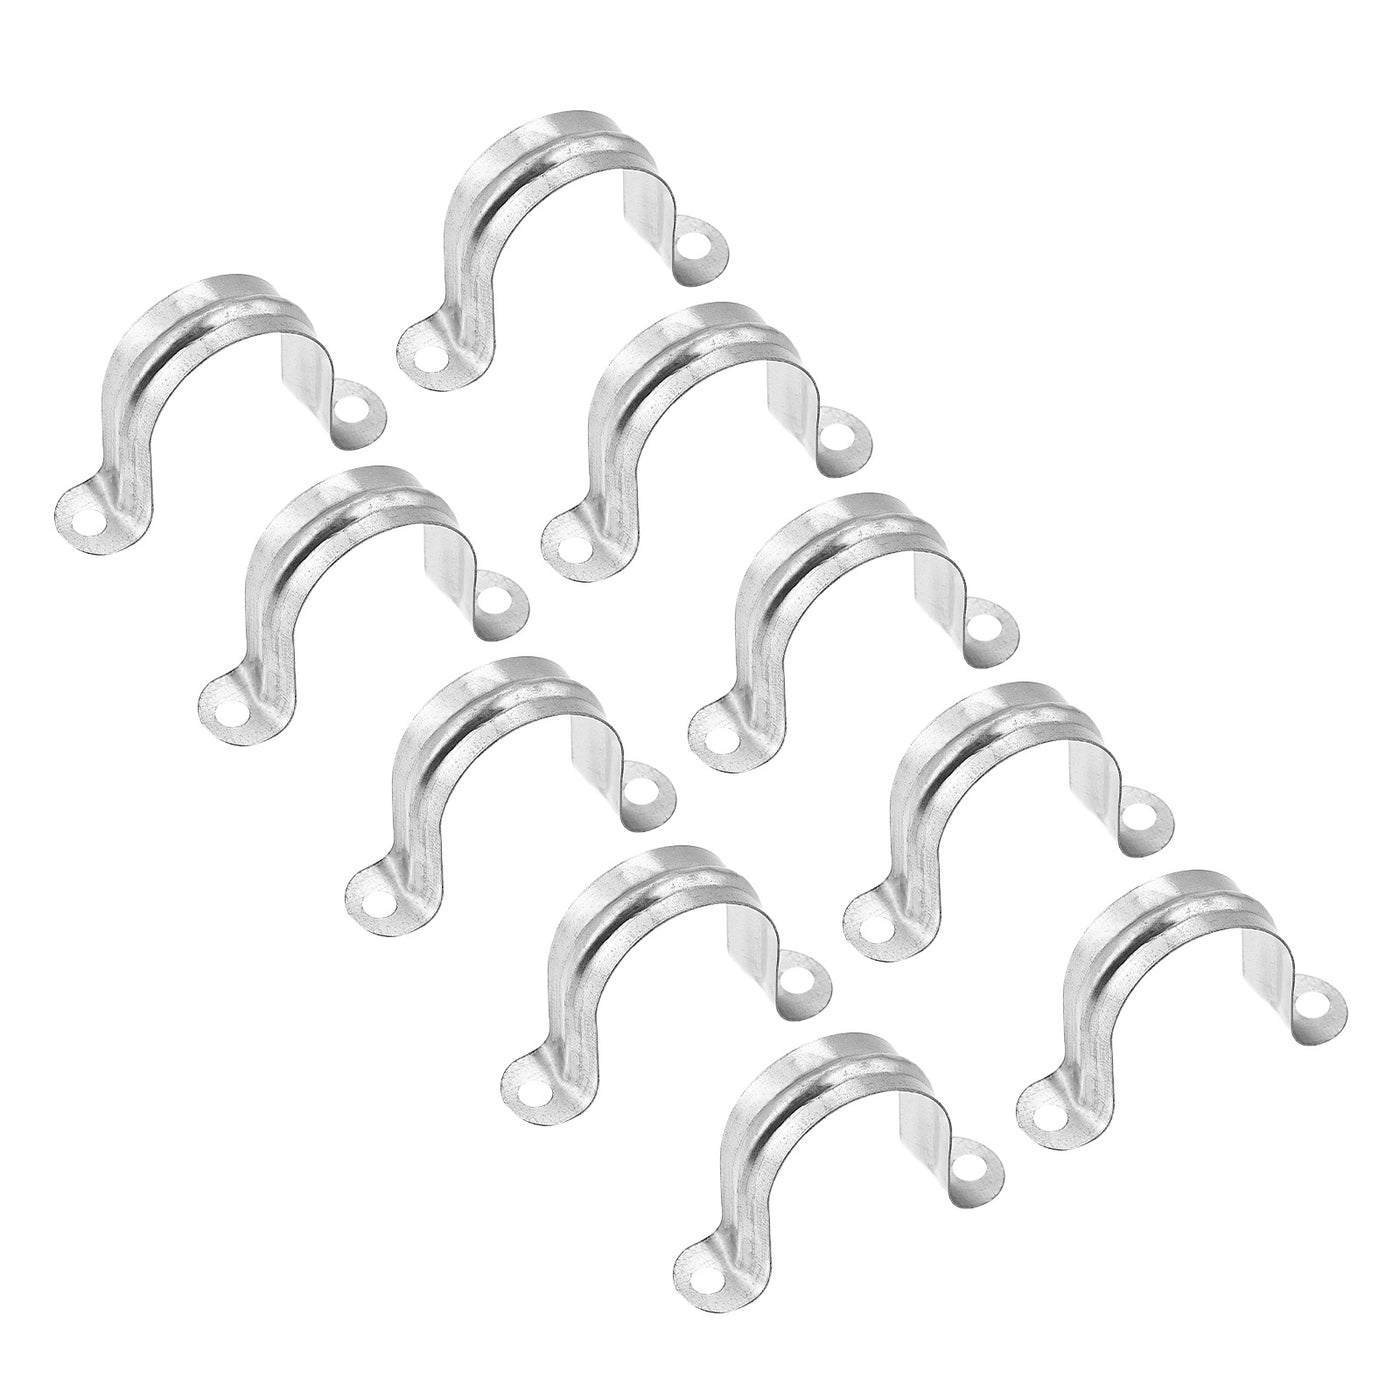 uxcell Uxcell Rigid Pipe Strap 24pcs 1 1/4" (32mm) Carbon Steel U Bracket Tension Tube Clamp